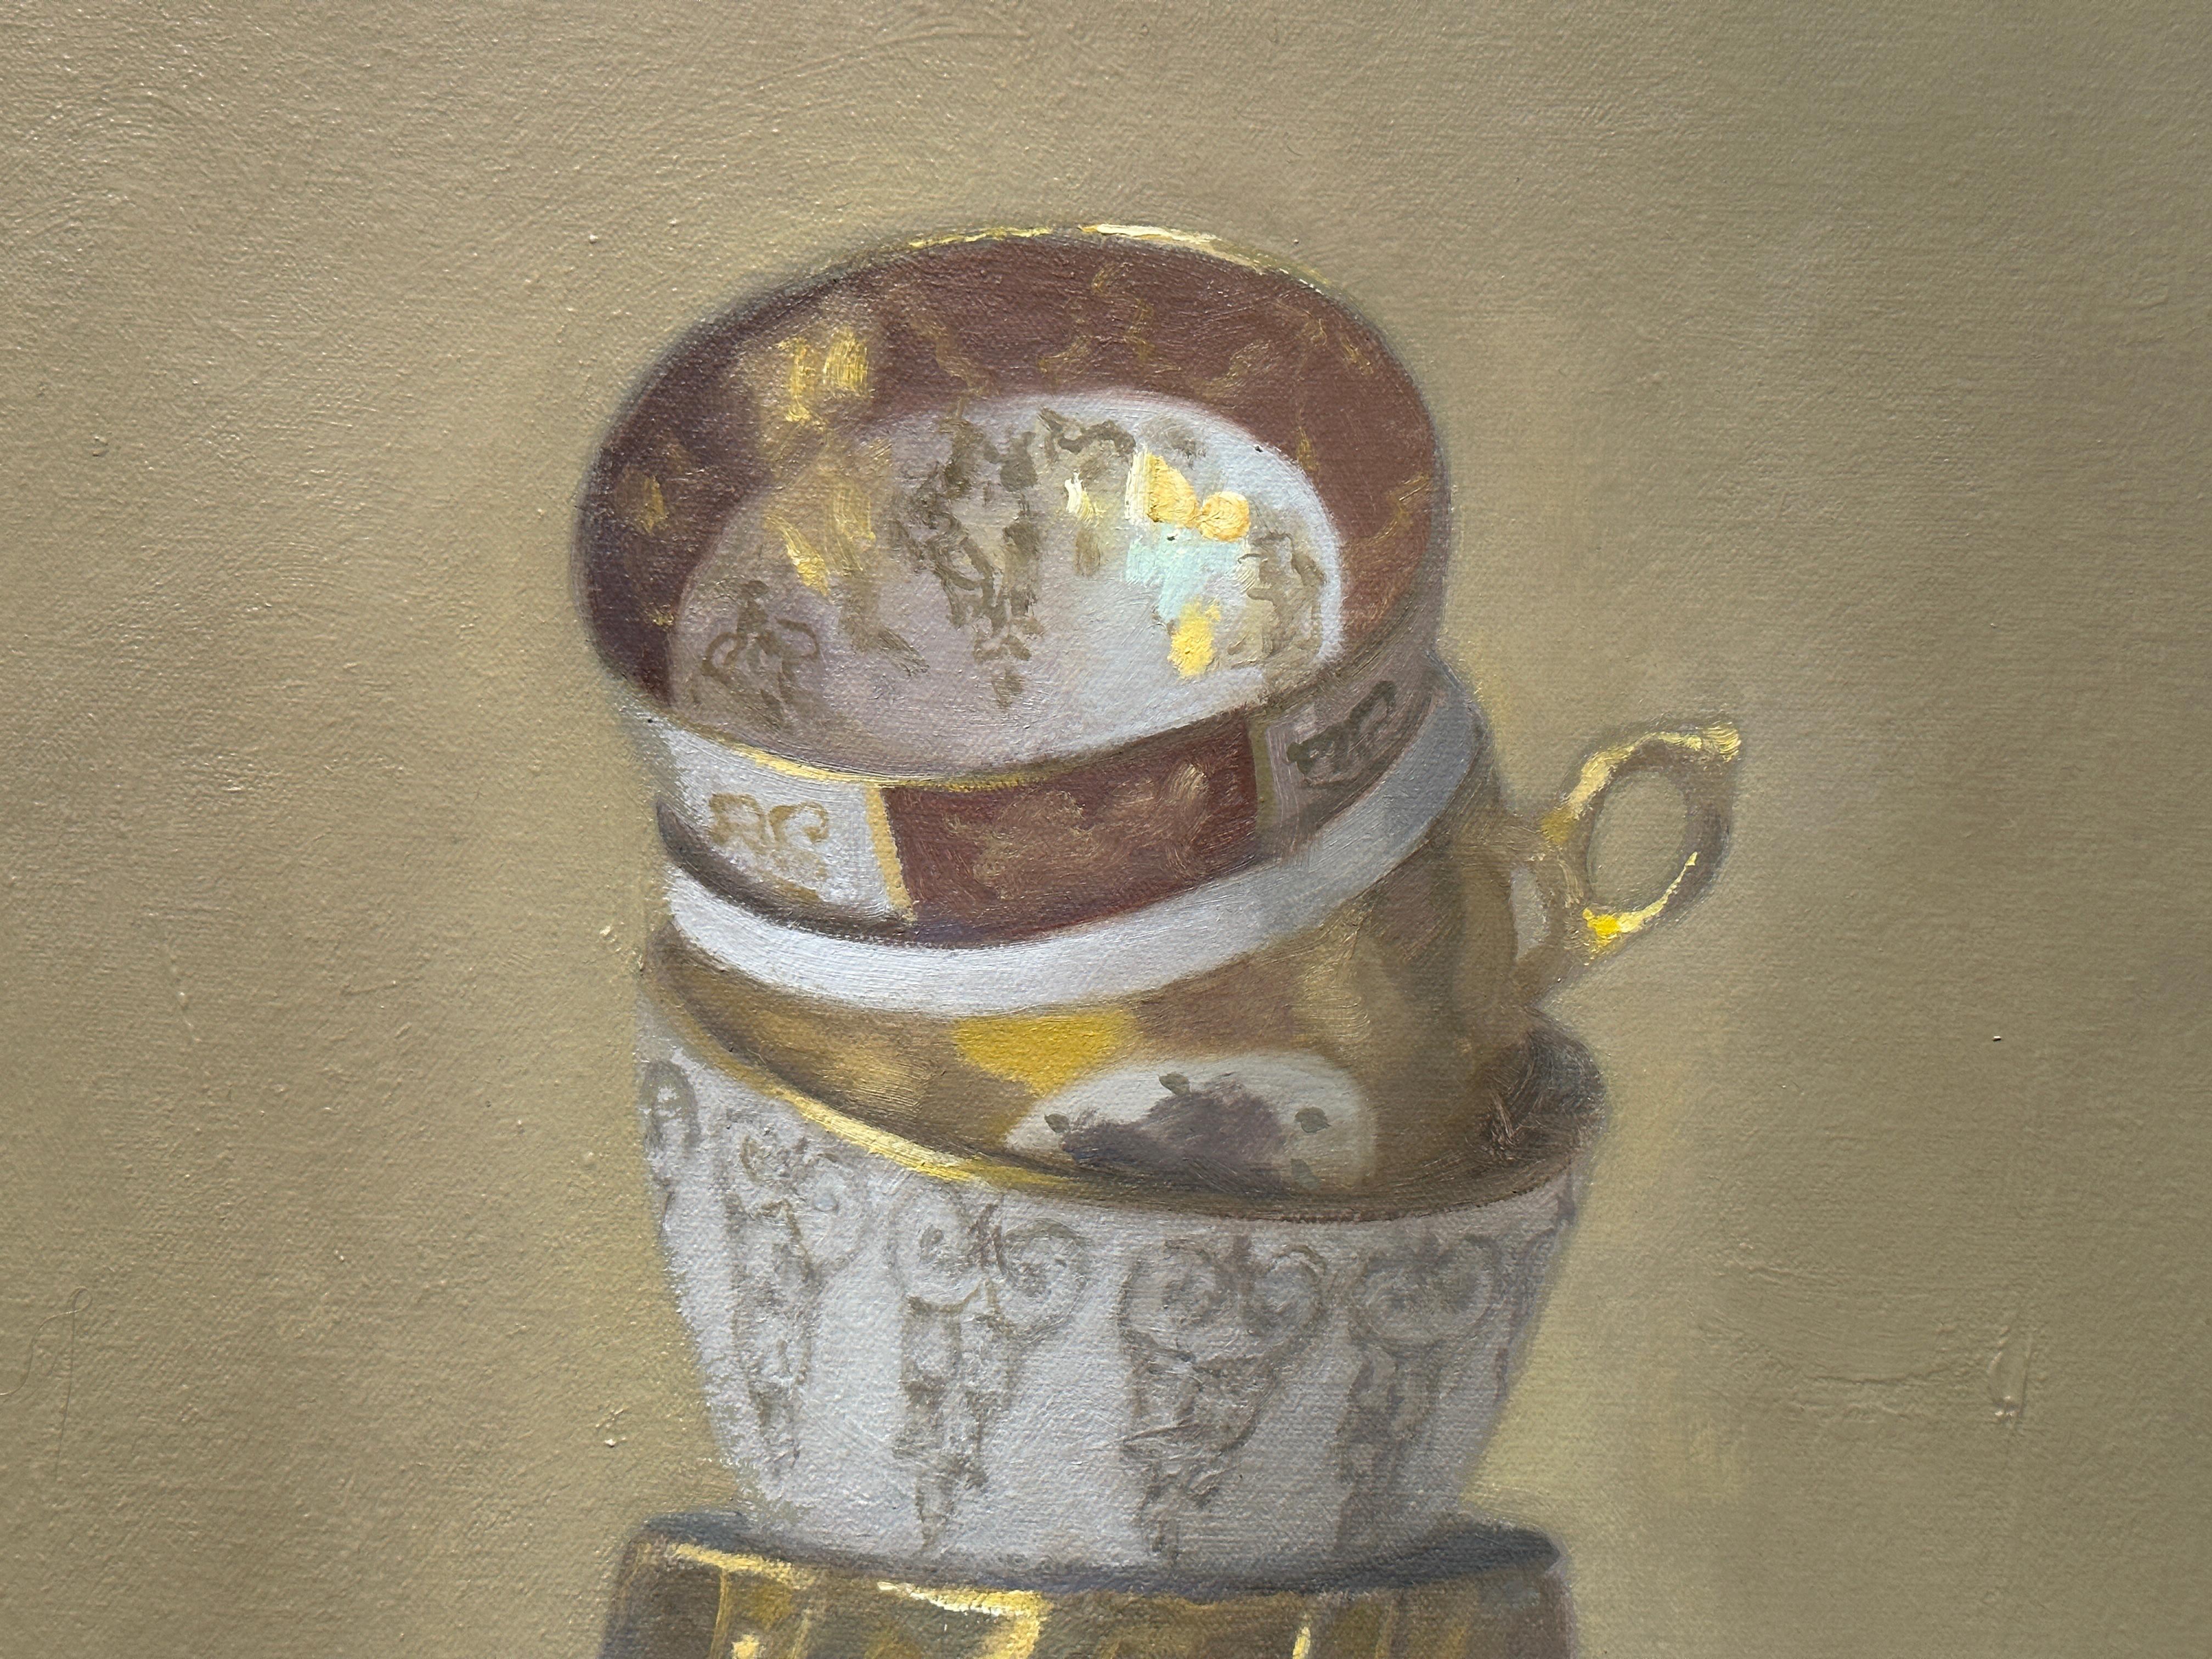 PORCELAIN AND GOLD TEACUPS - Contemporary Realism / Still Life For Sale 3